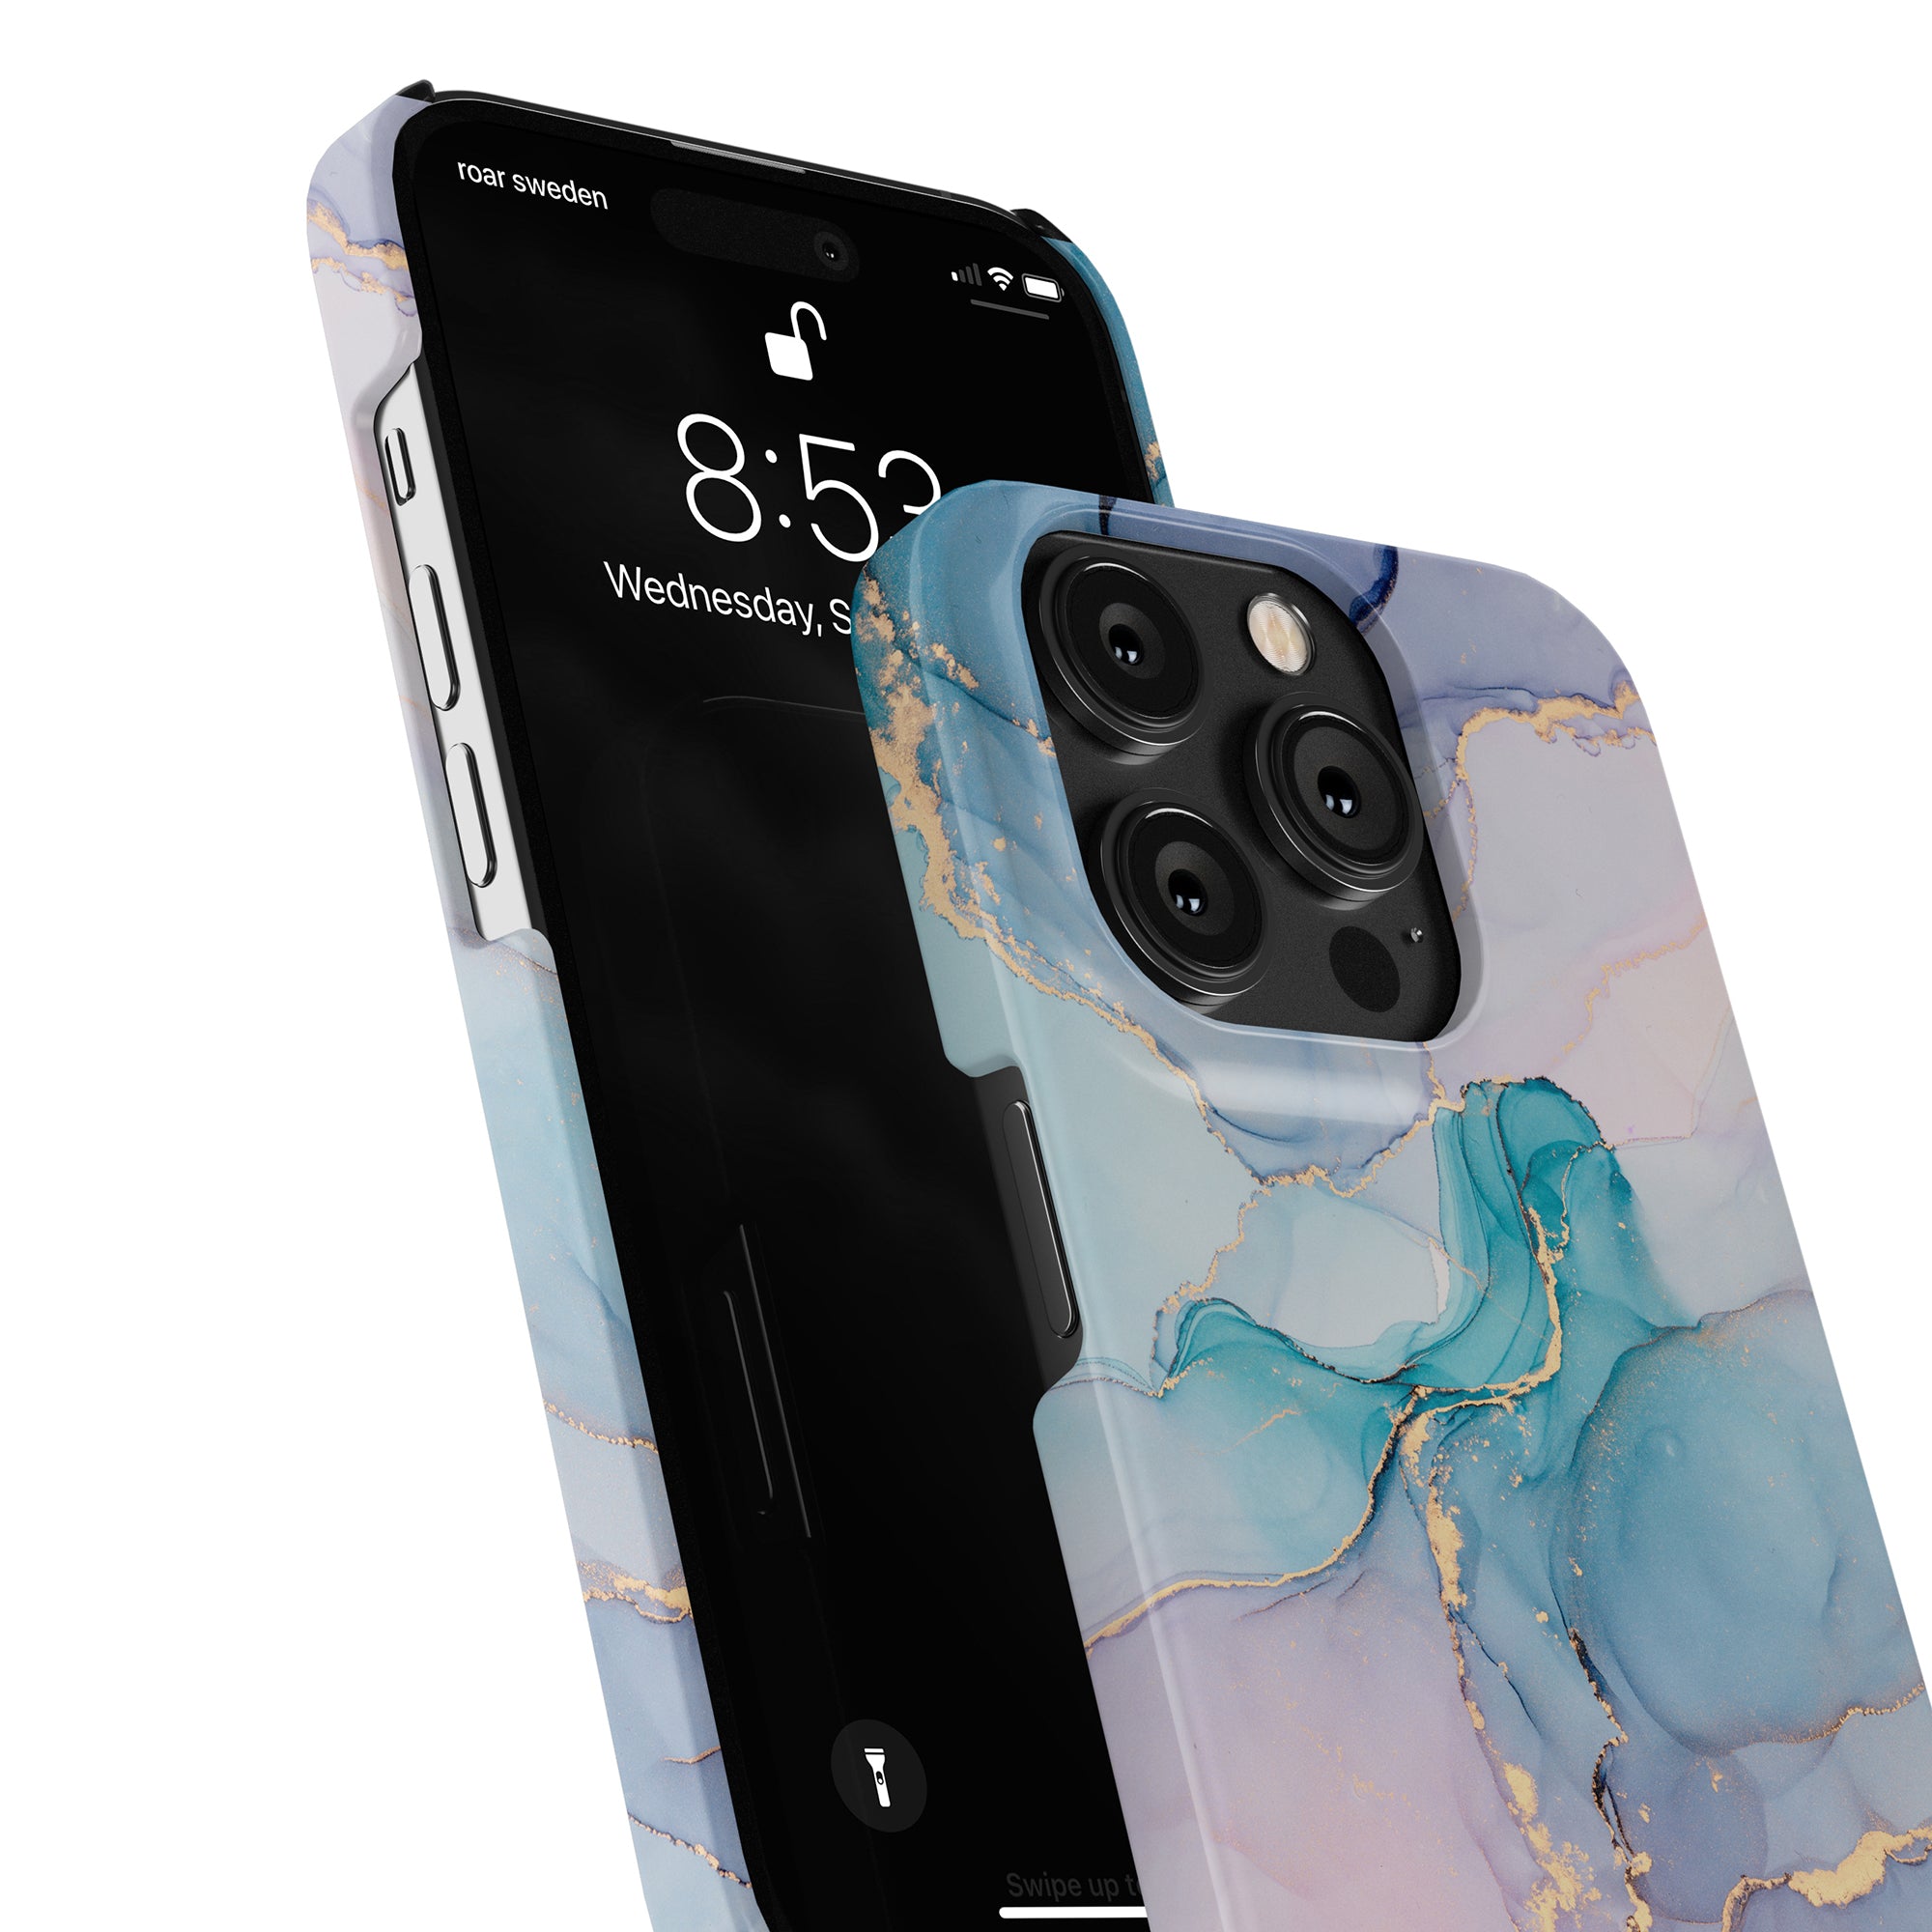 A Swirl - Slim case providing skydd for the iPhone 11 pro, brought to you by Roar Sweden.